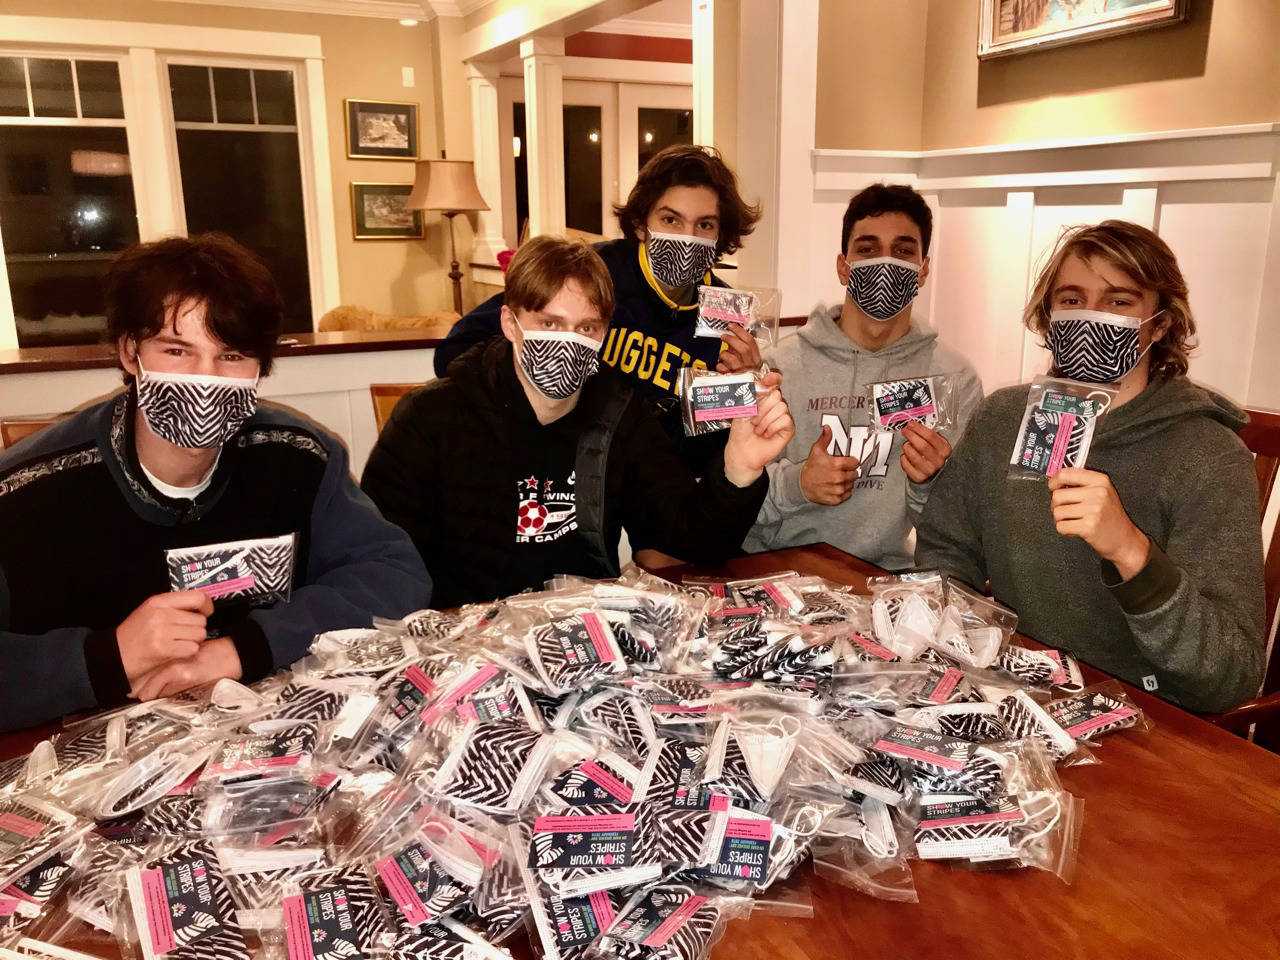 Nash Hawkins (far right) and some of his friends (from left to right, Kenny Marks, Hawkins Sanborn, James Pearce and Jacob Tomaselli) stuffed 500 zebra masks and information cards into bags for Rare Disease Day. Courtesy photo